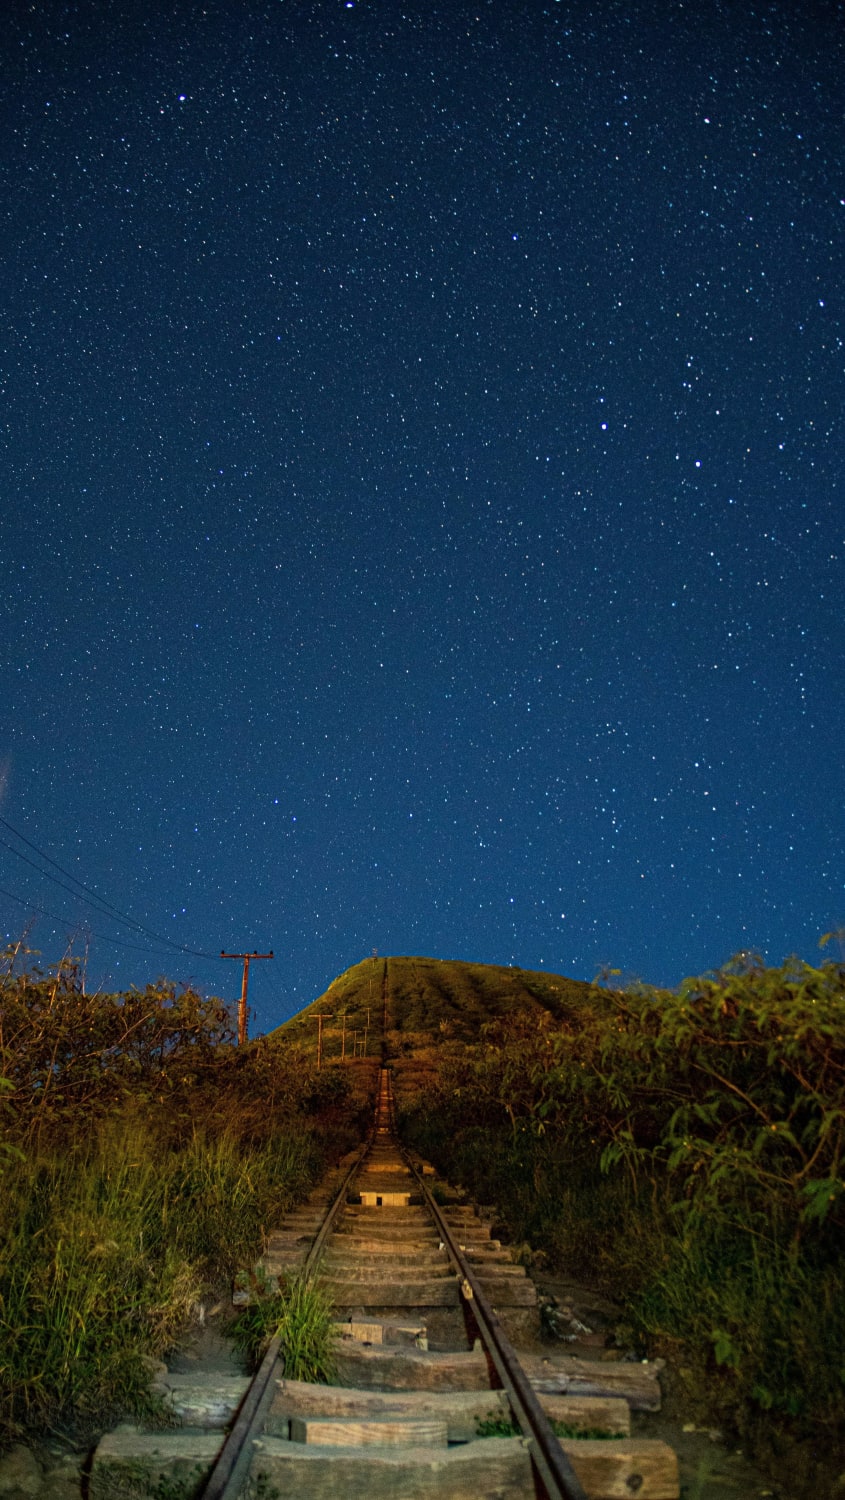 Amateur astrophorographer here! This is my first post on this sub, I took this photo while on a 12 AM hike in Oahu, Hawaii!